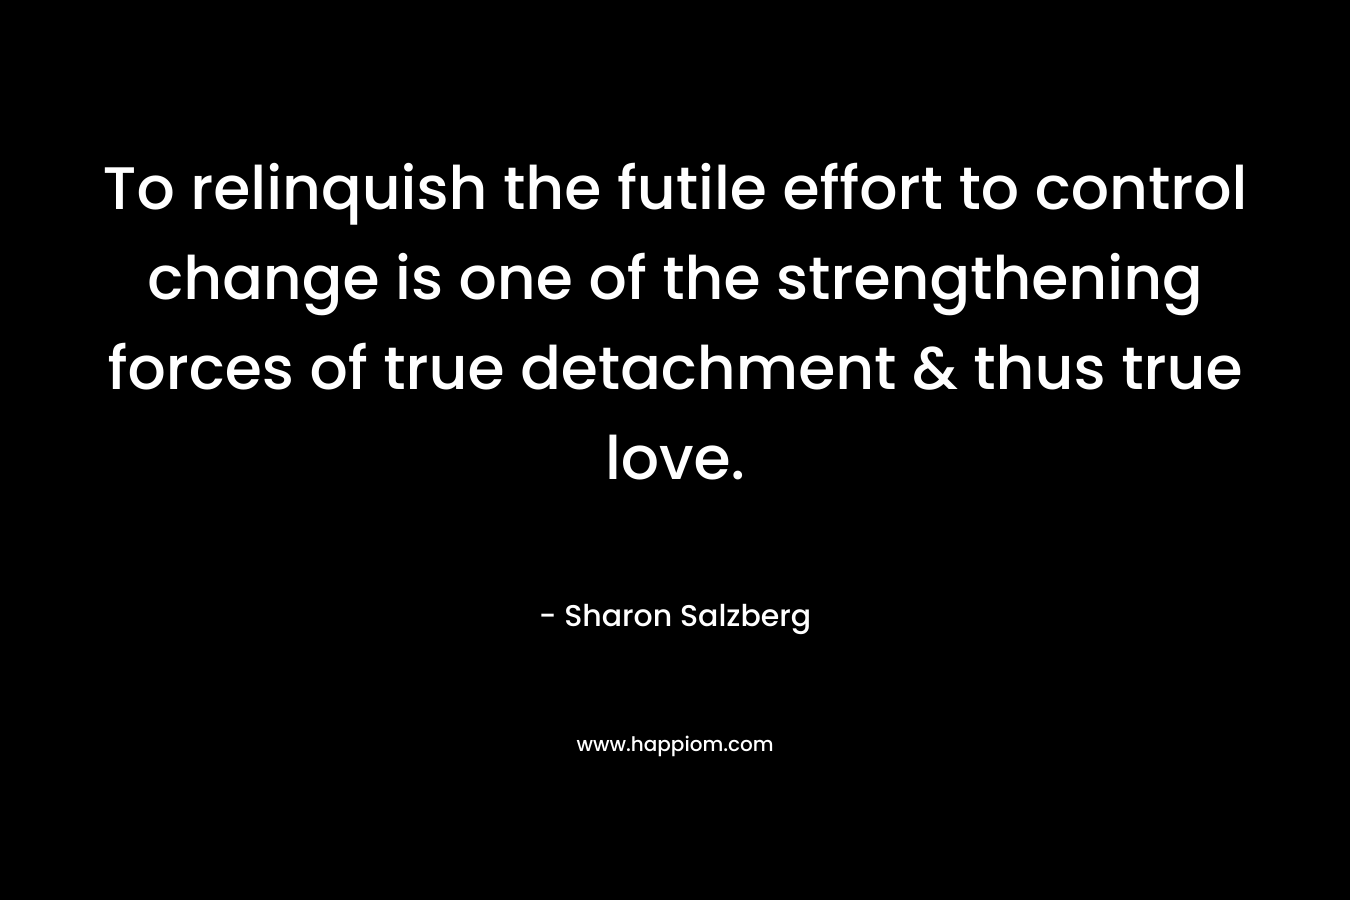 To relinquish the futile effort to control change is one of the strengthening forces of true detachment & thus true love. – Sharon Salzberg